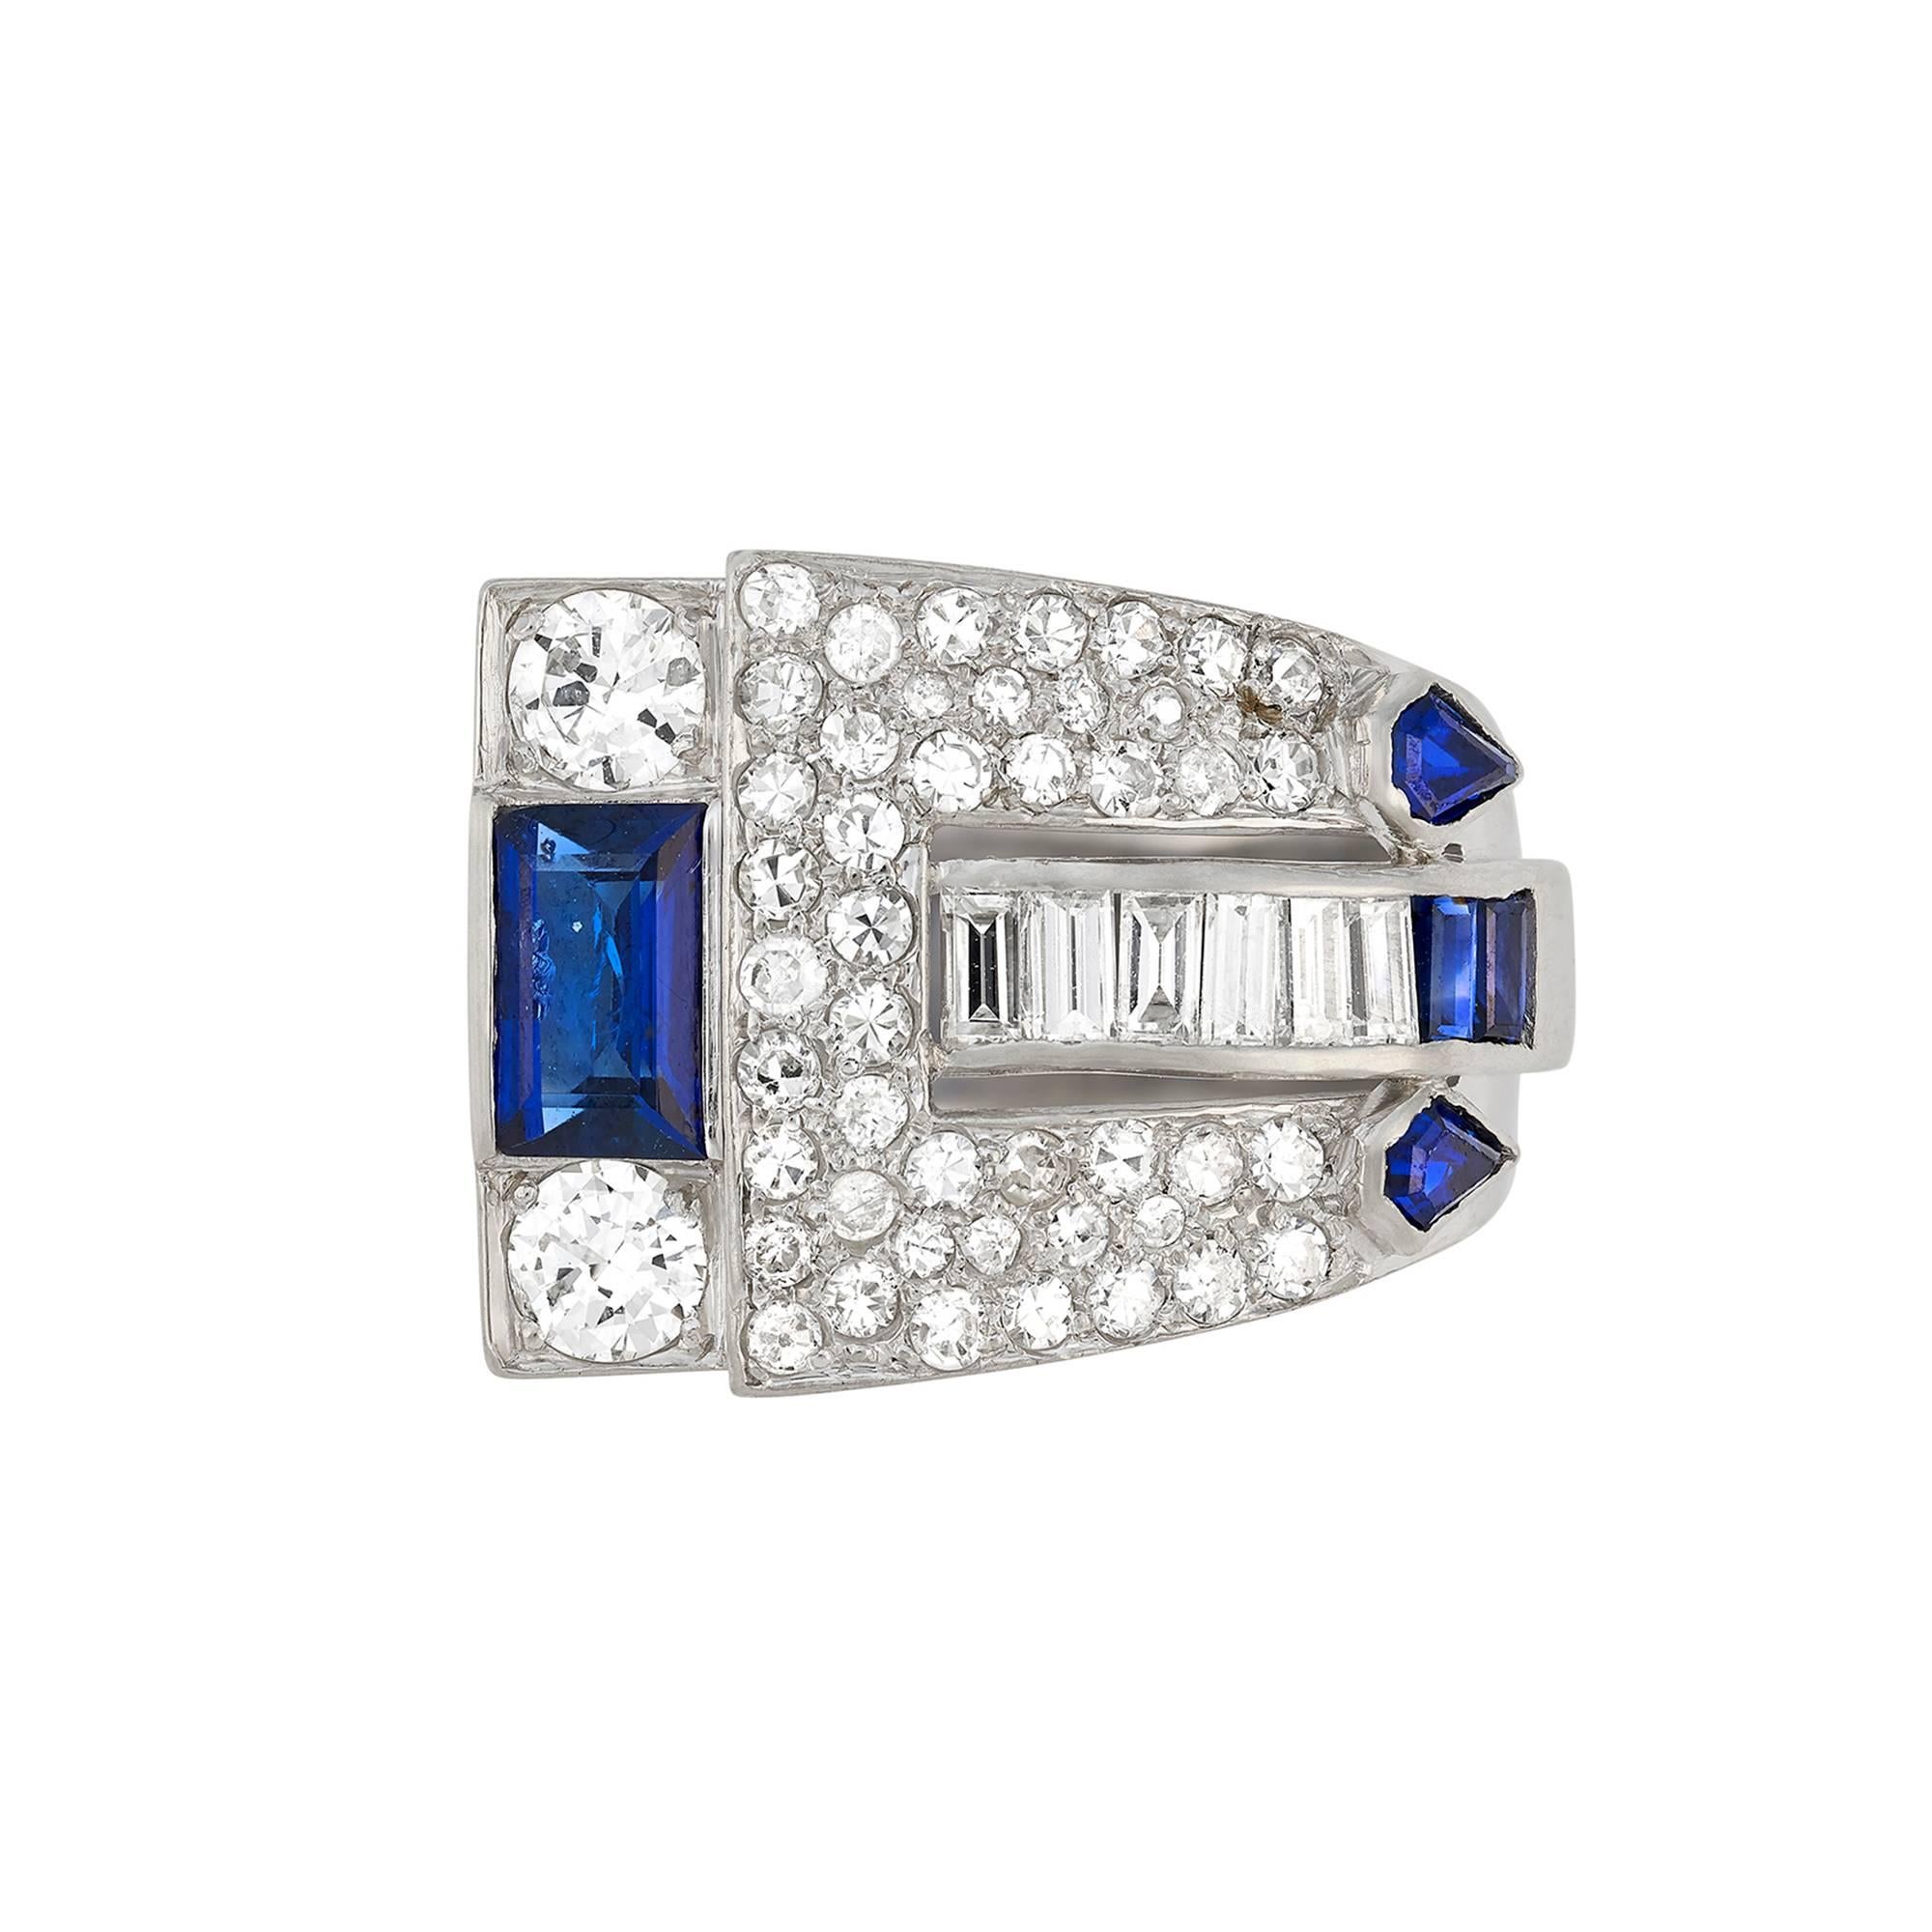 Art Deco pave set diamond, rectangular and kite shaped sapphire ring set in platinum, American circa 1930

Weight of diamonds 2.25 carats approximately

Finger size - leading edge K / 5.25